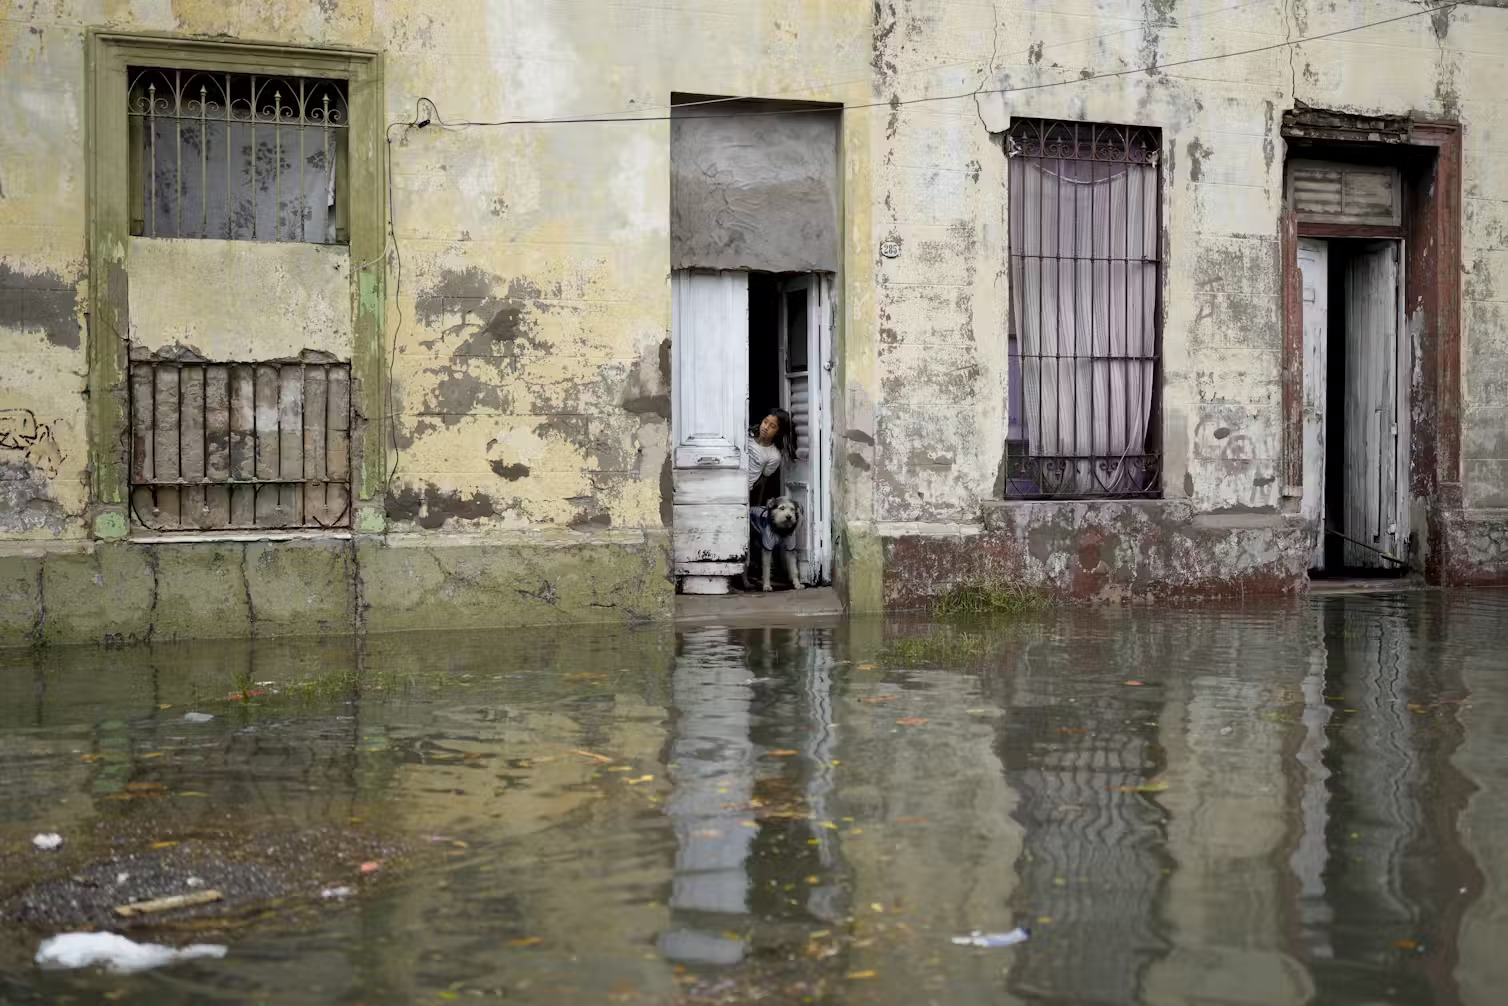 A youth and her dog peer from their home's entrance on a flooded street.